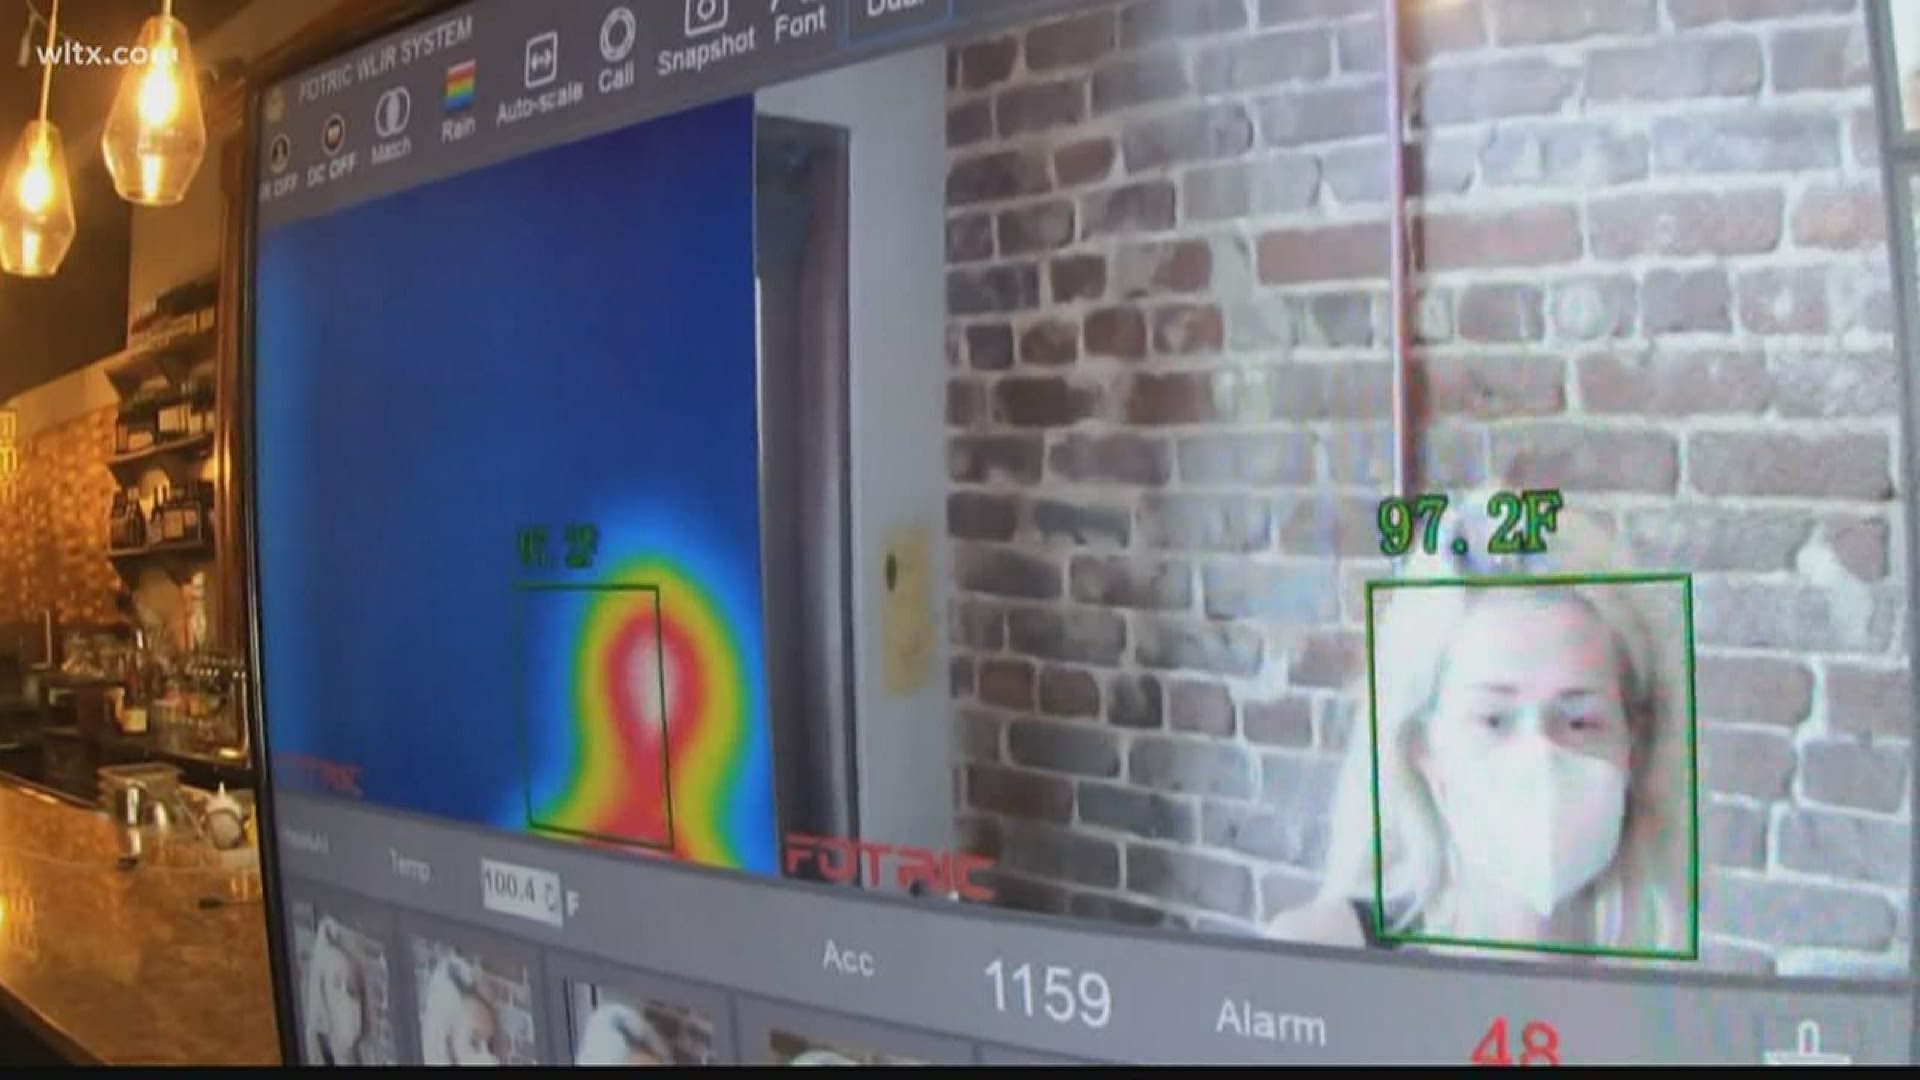 Owner of the 929 Kitchen and Bar installed a thermal camera that is able to capture the temperature of 8 people at a time as they walk through the front door